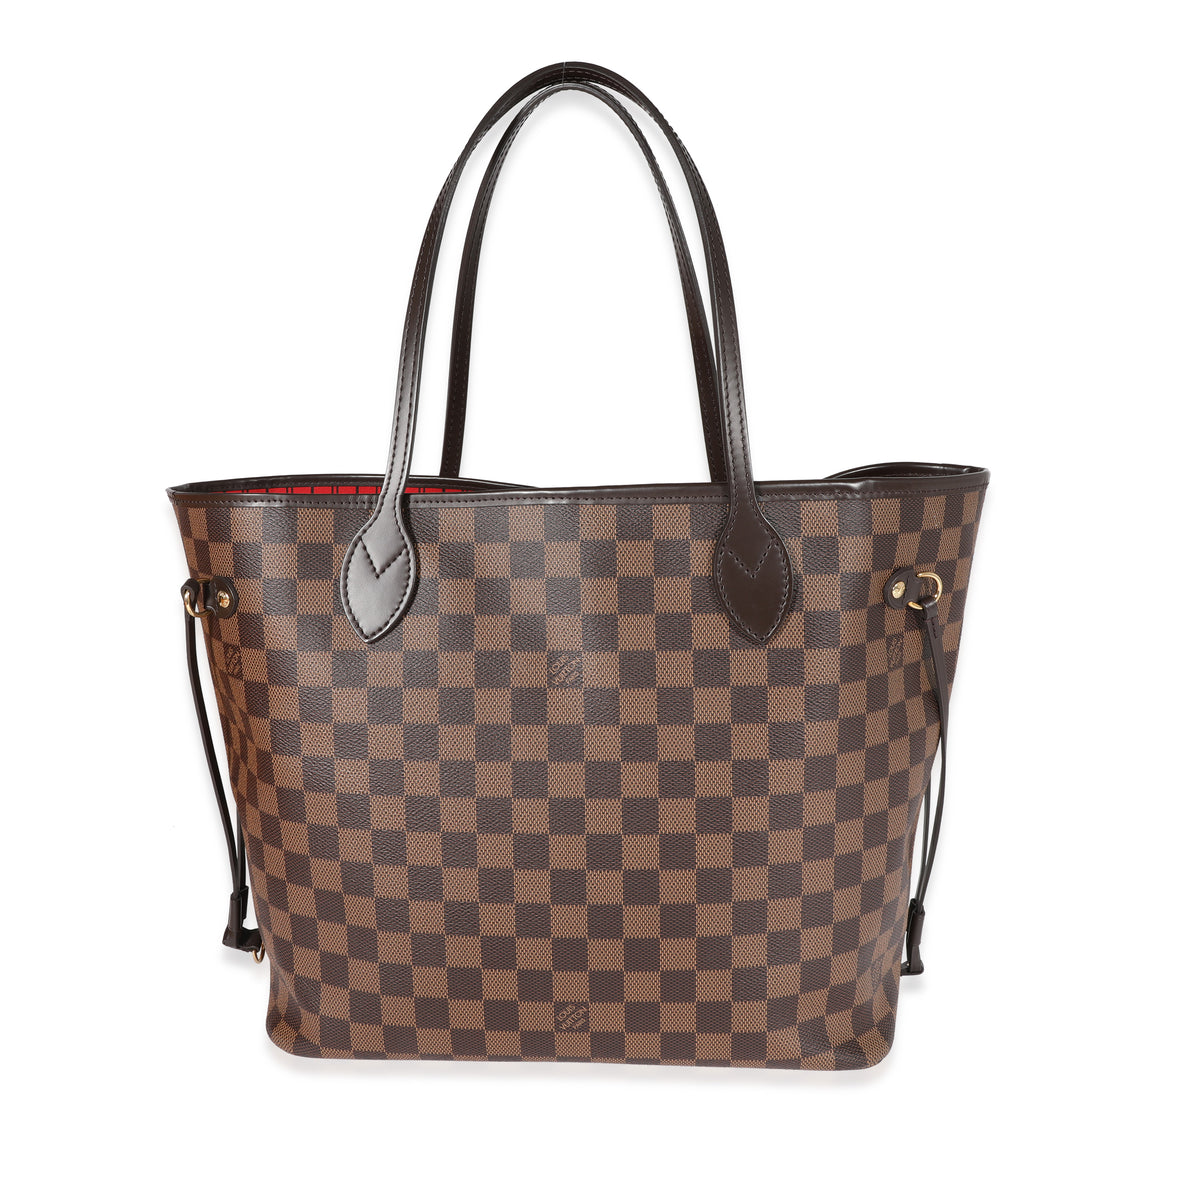 LOUIS VUITTON // Neverfull MM in Damier Ebene $1,695 You can never